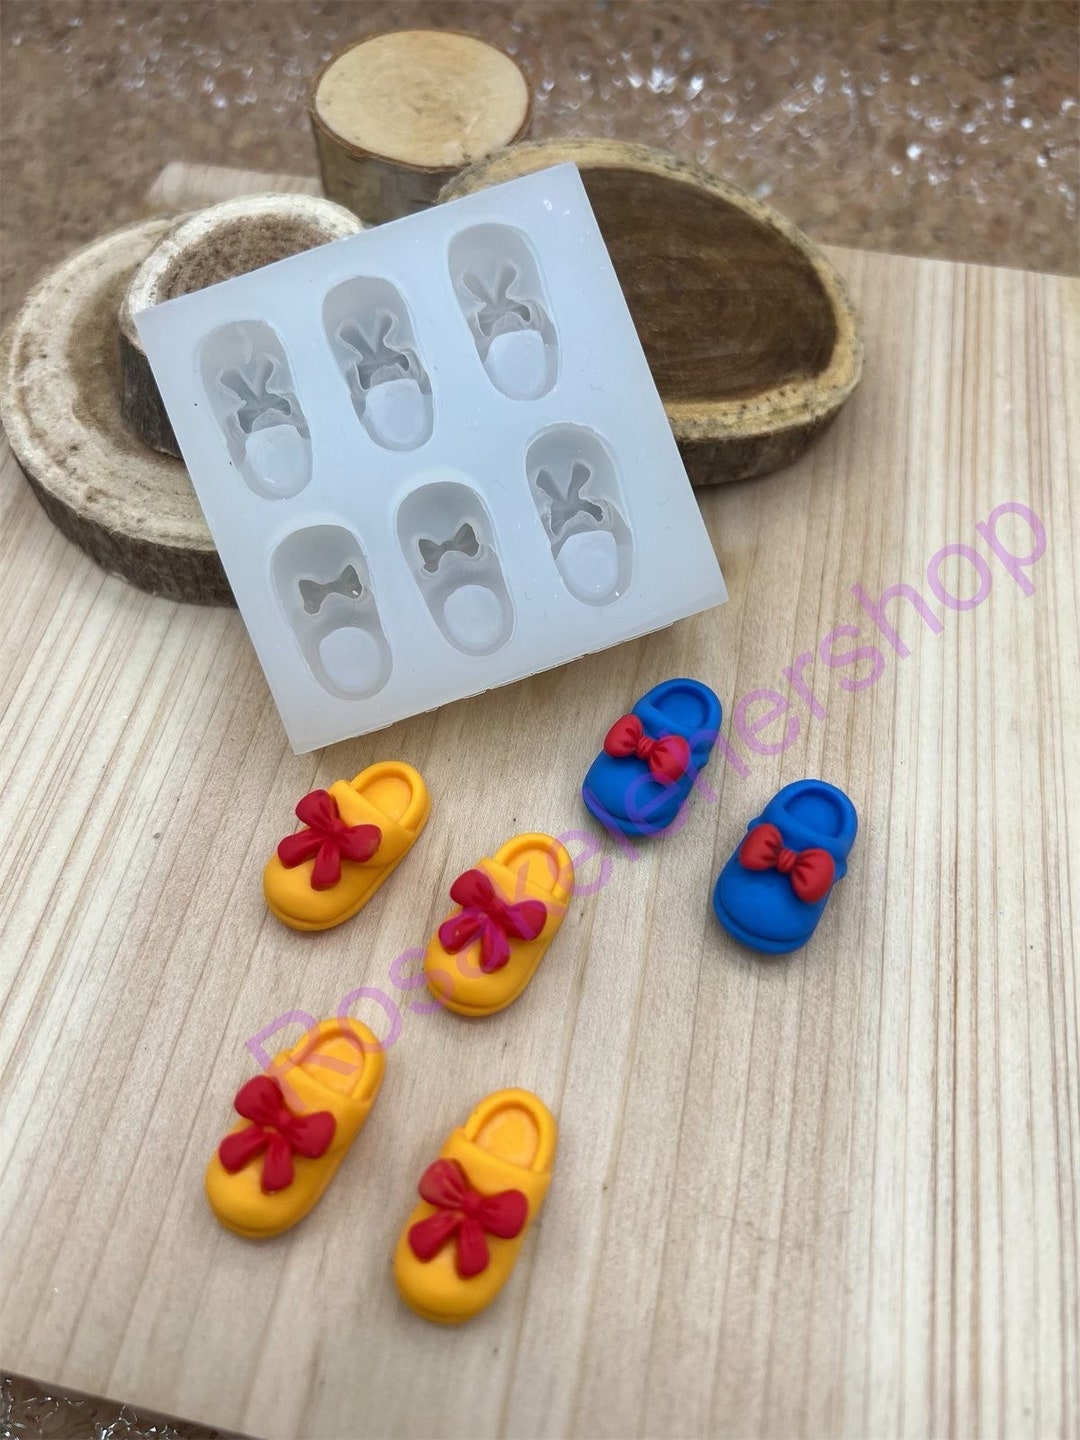 Teddy Bear Silicone Mold Very Small 3 Cavities for Fondant-baby  Shower-resin-polymer Clay-candy-jewelry-handcrafts-handmade Molds 